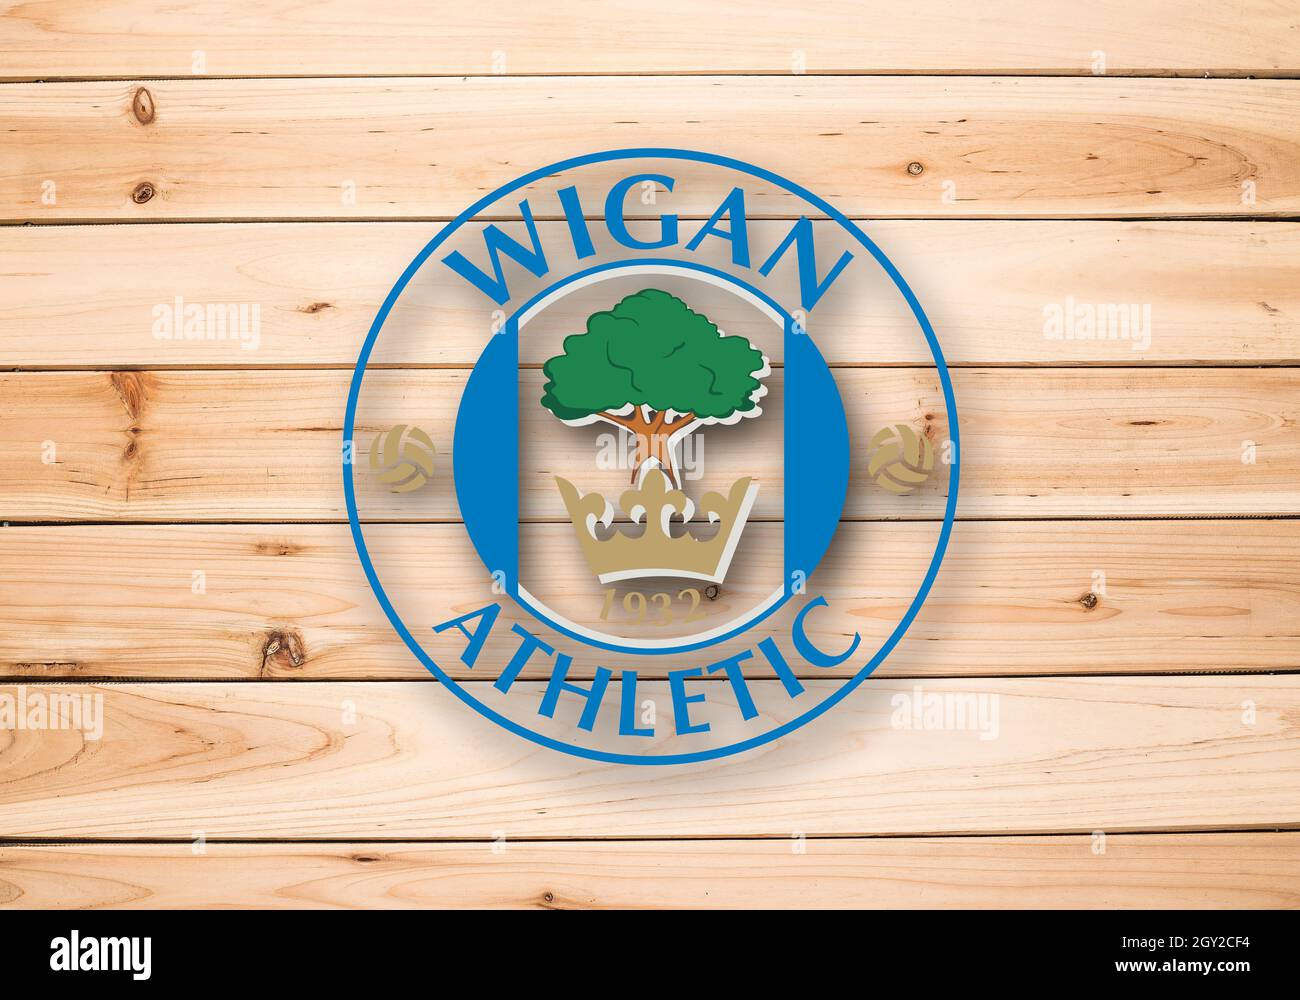 Coat of arms Wigan Athletic F.C., Wigan, Greater Manchester, a football  club from England Stock Photo - Alamy